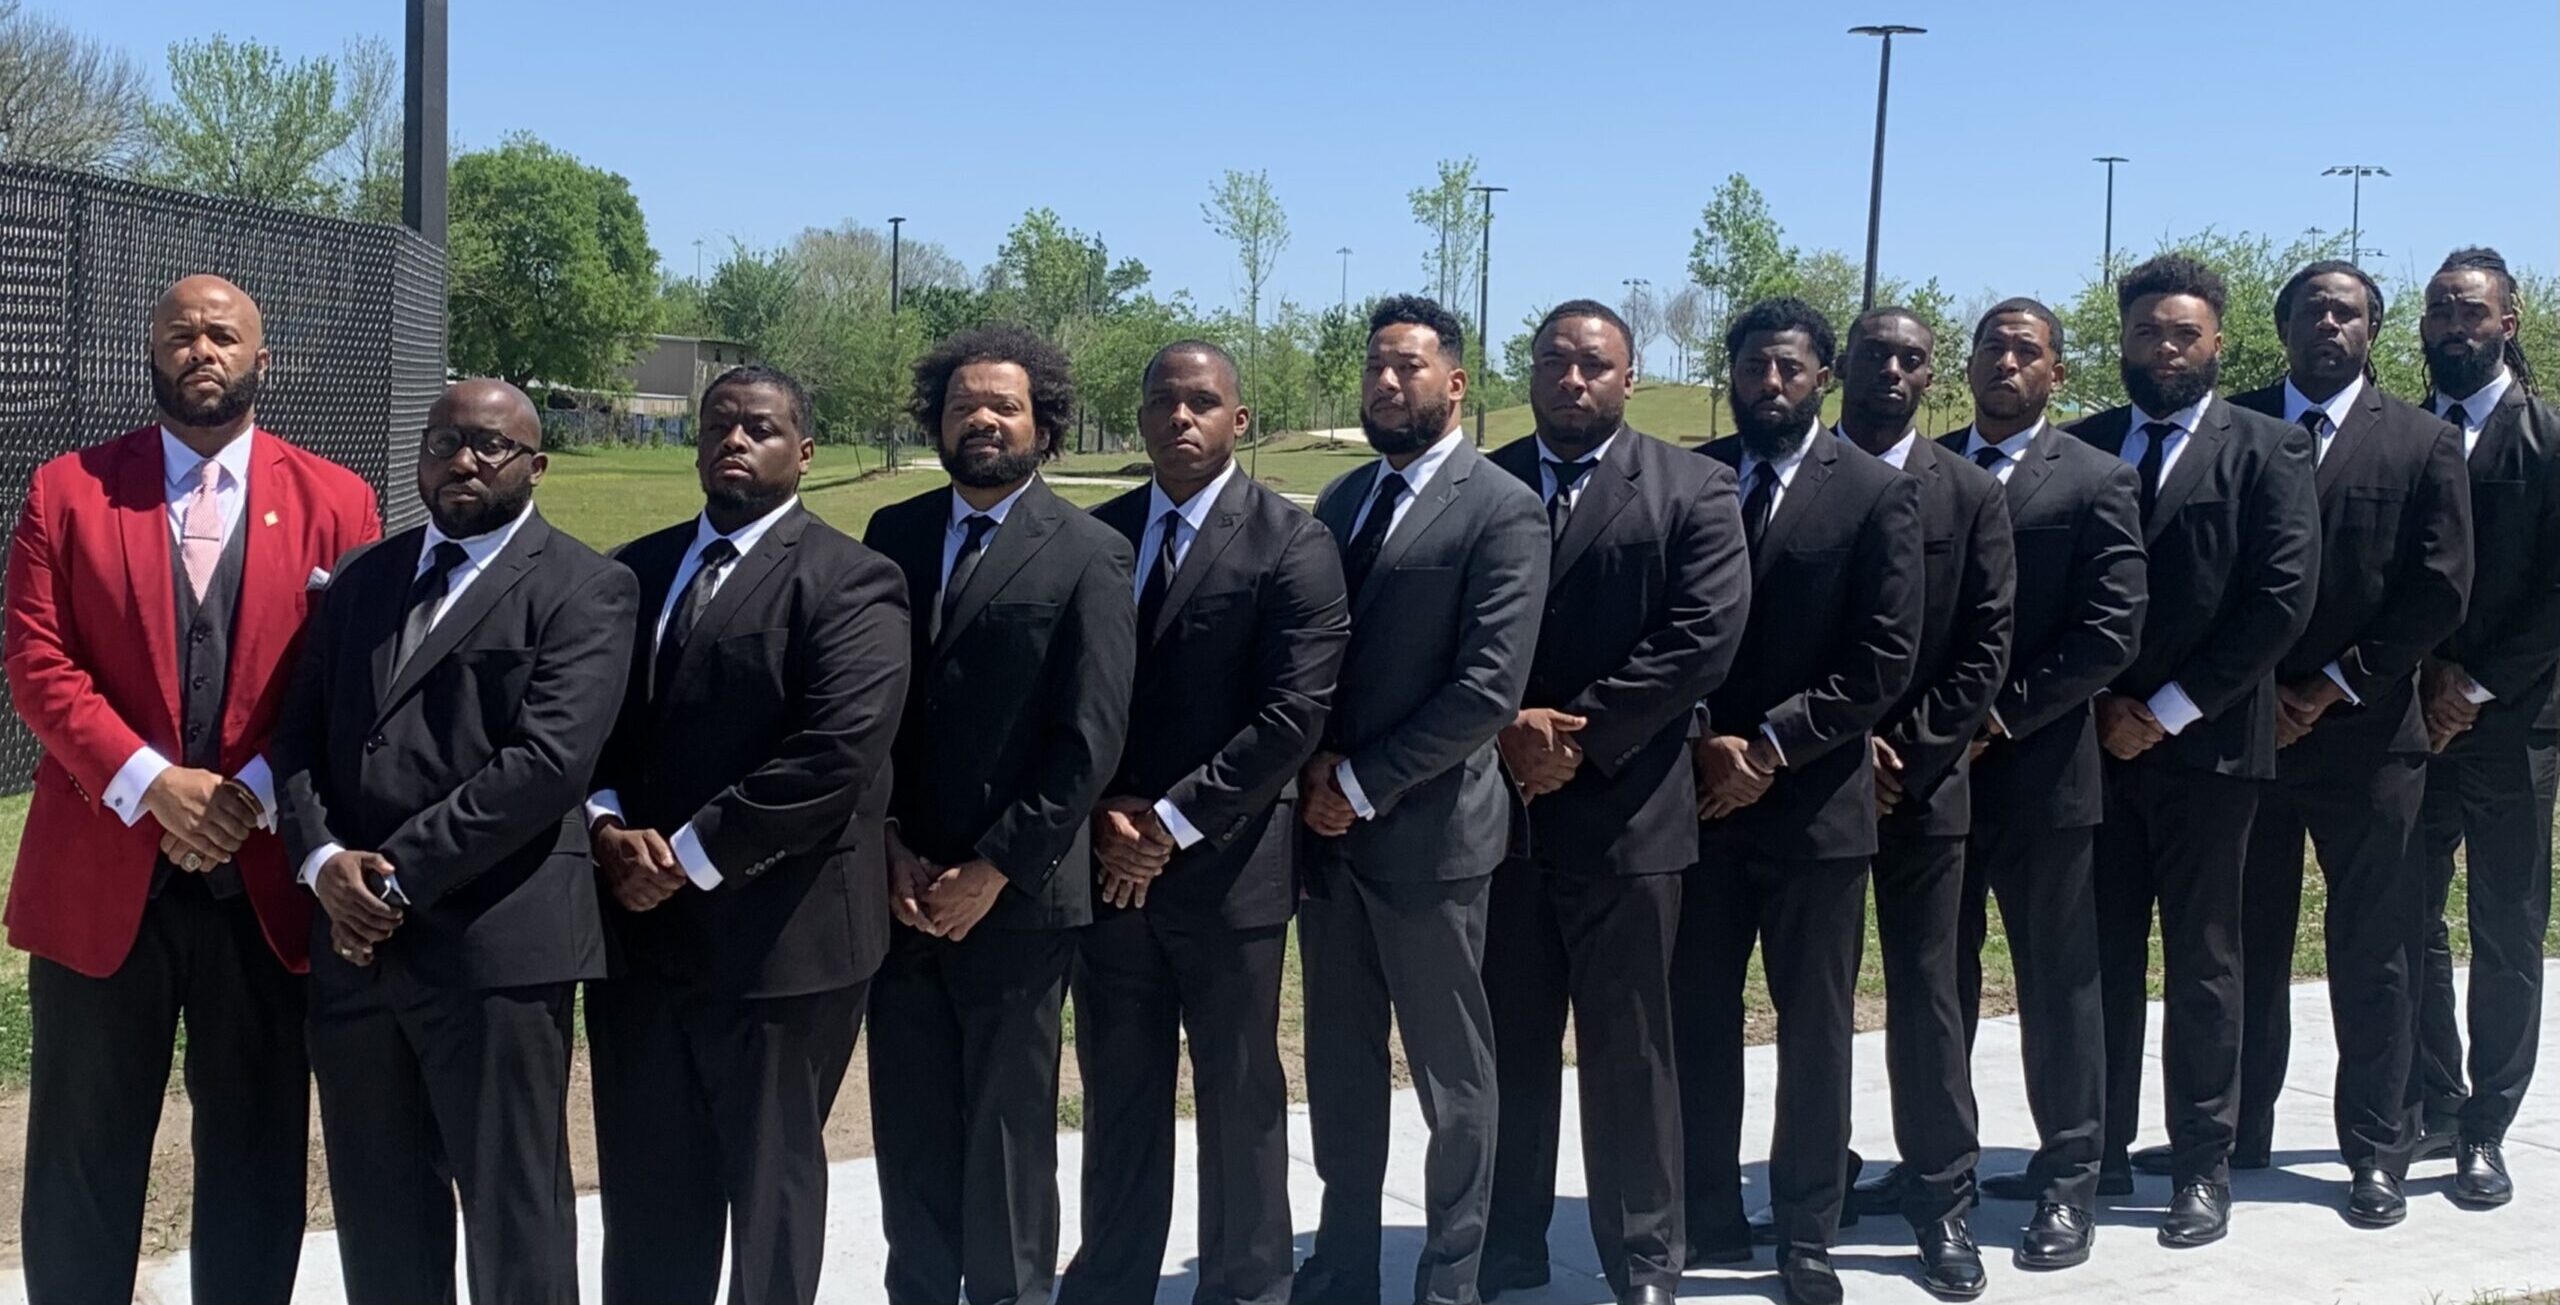 Pearland Manvel Fresno (TX) Chapter – Kappa Alpha Psi Fraternity, Inc.